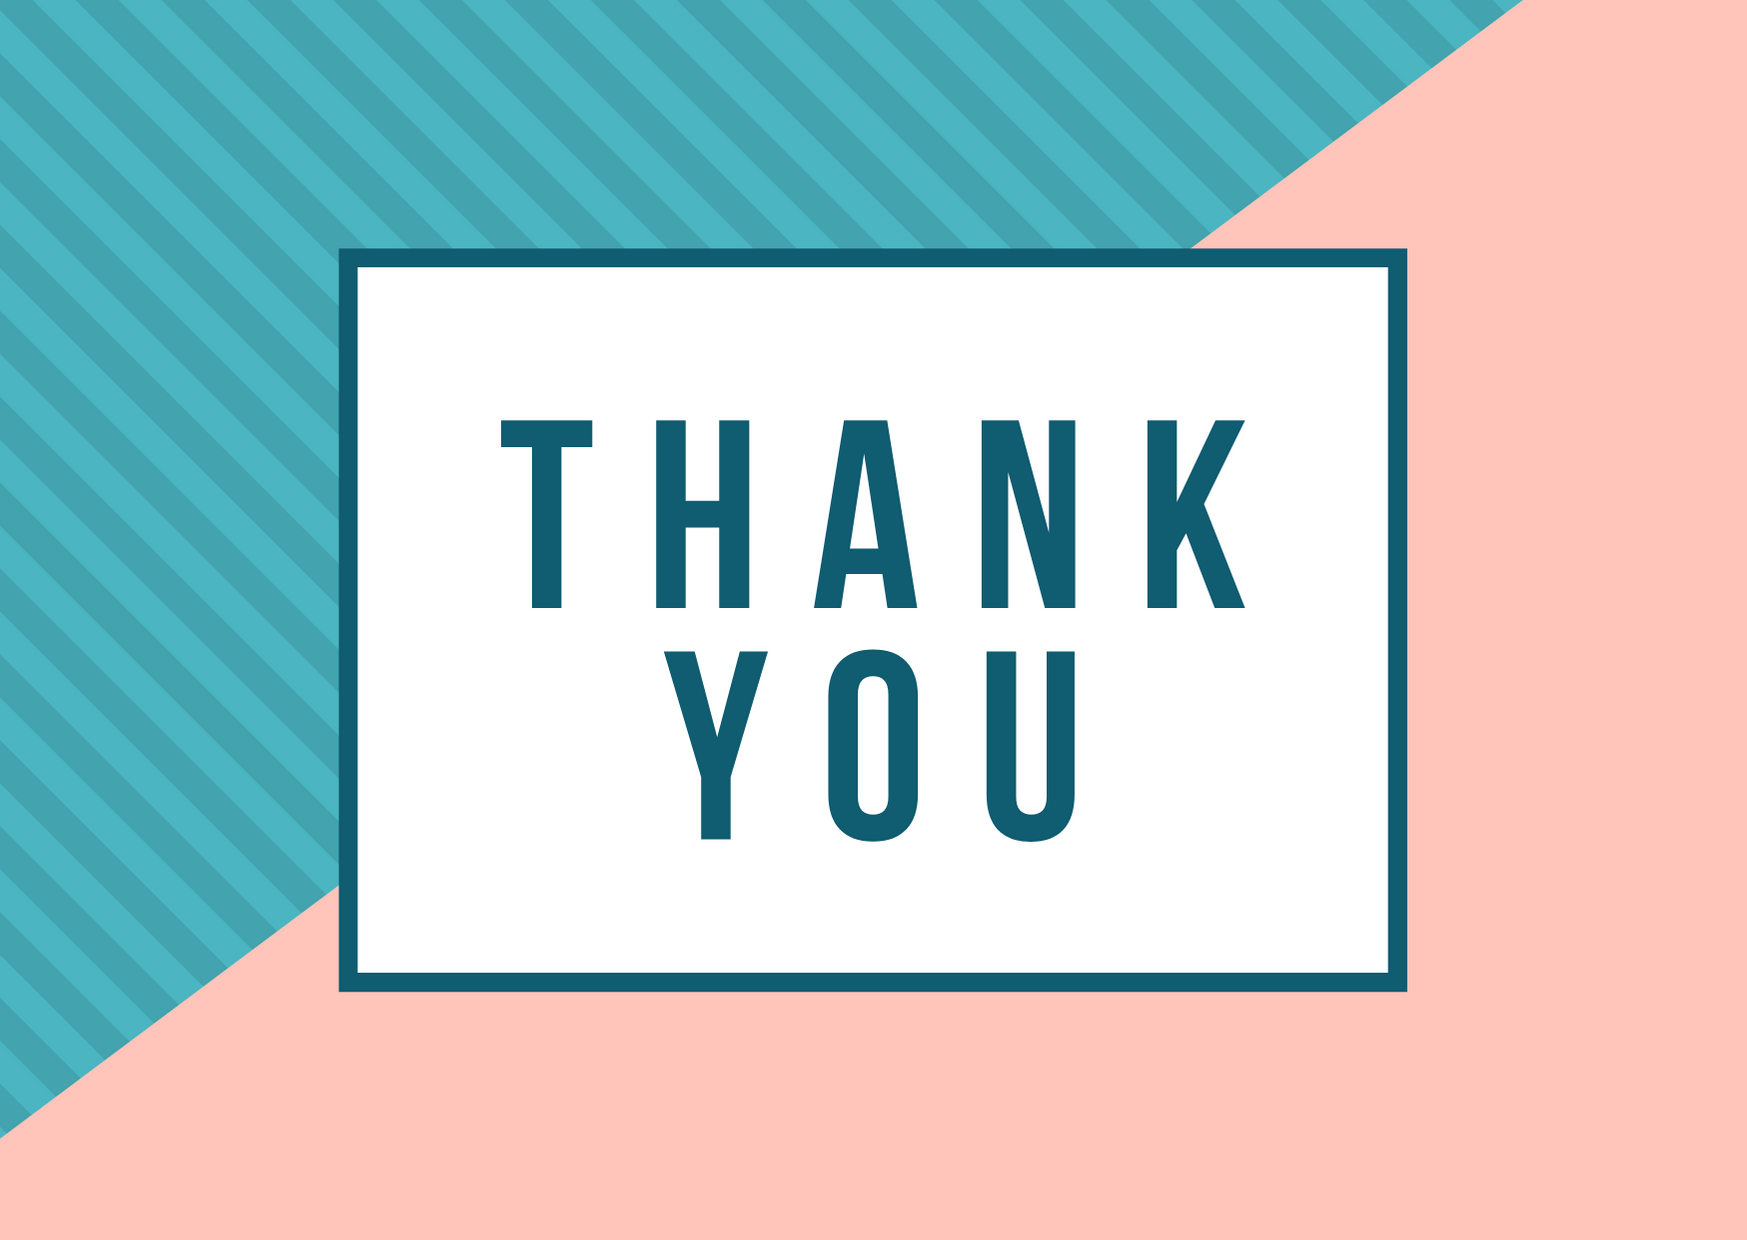 A pink abd blue image says the words "Thank You" as a thank you to the office's client base